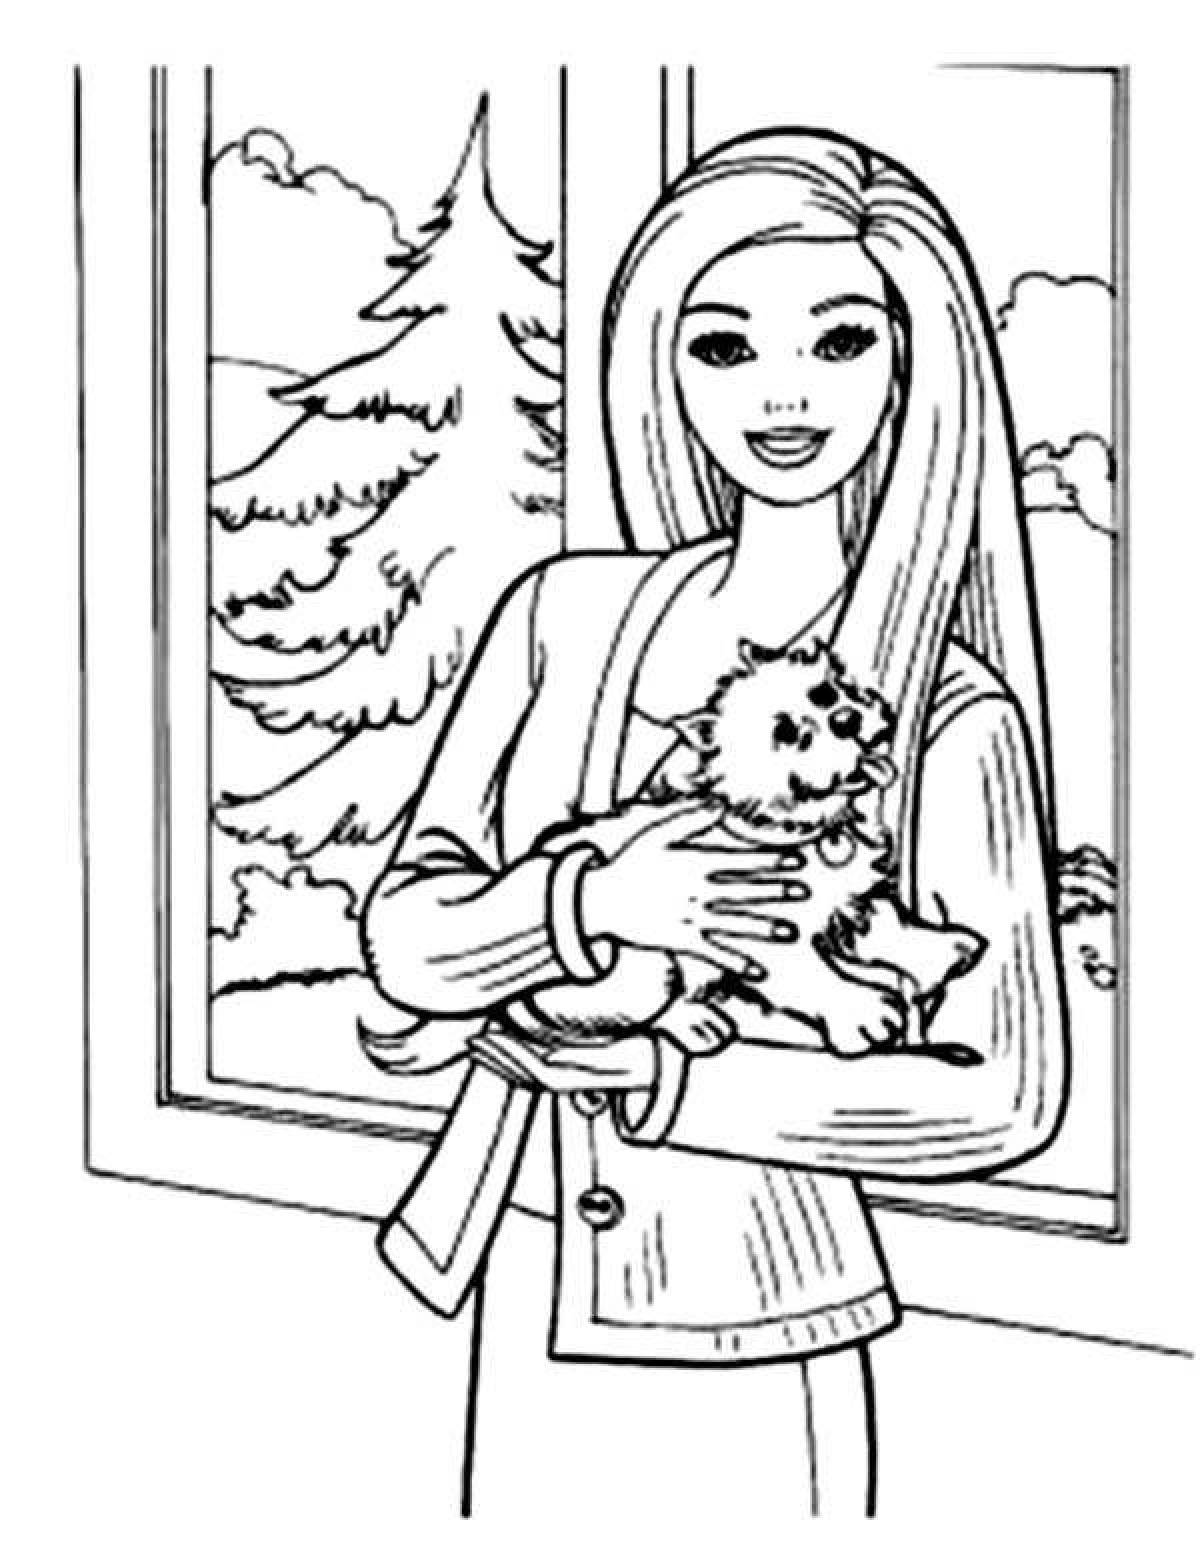 Playful coloring of Barbie with a dog